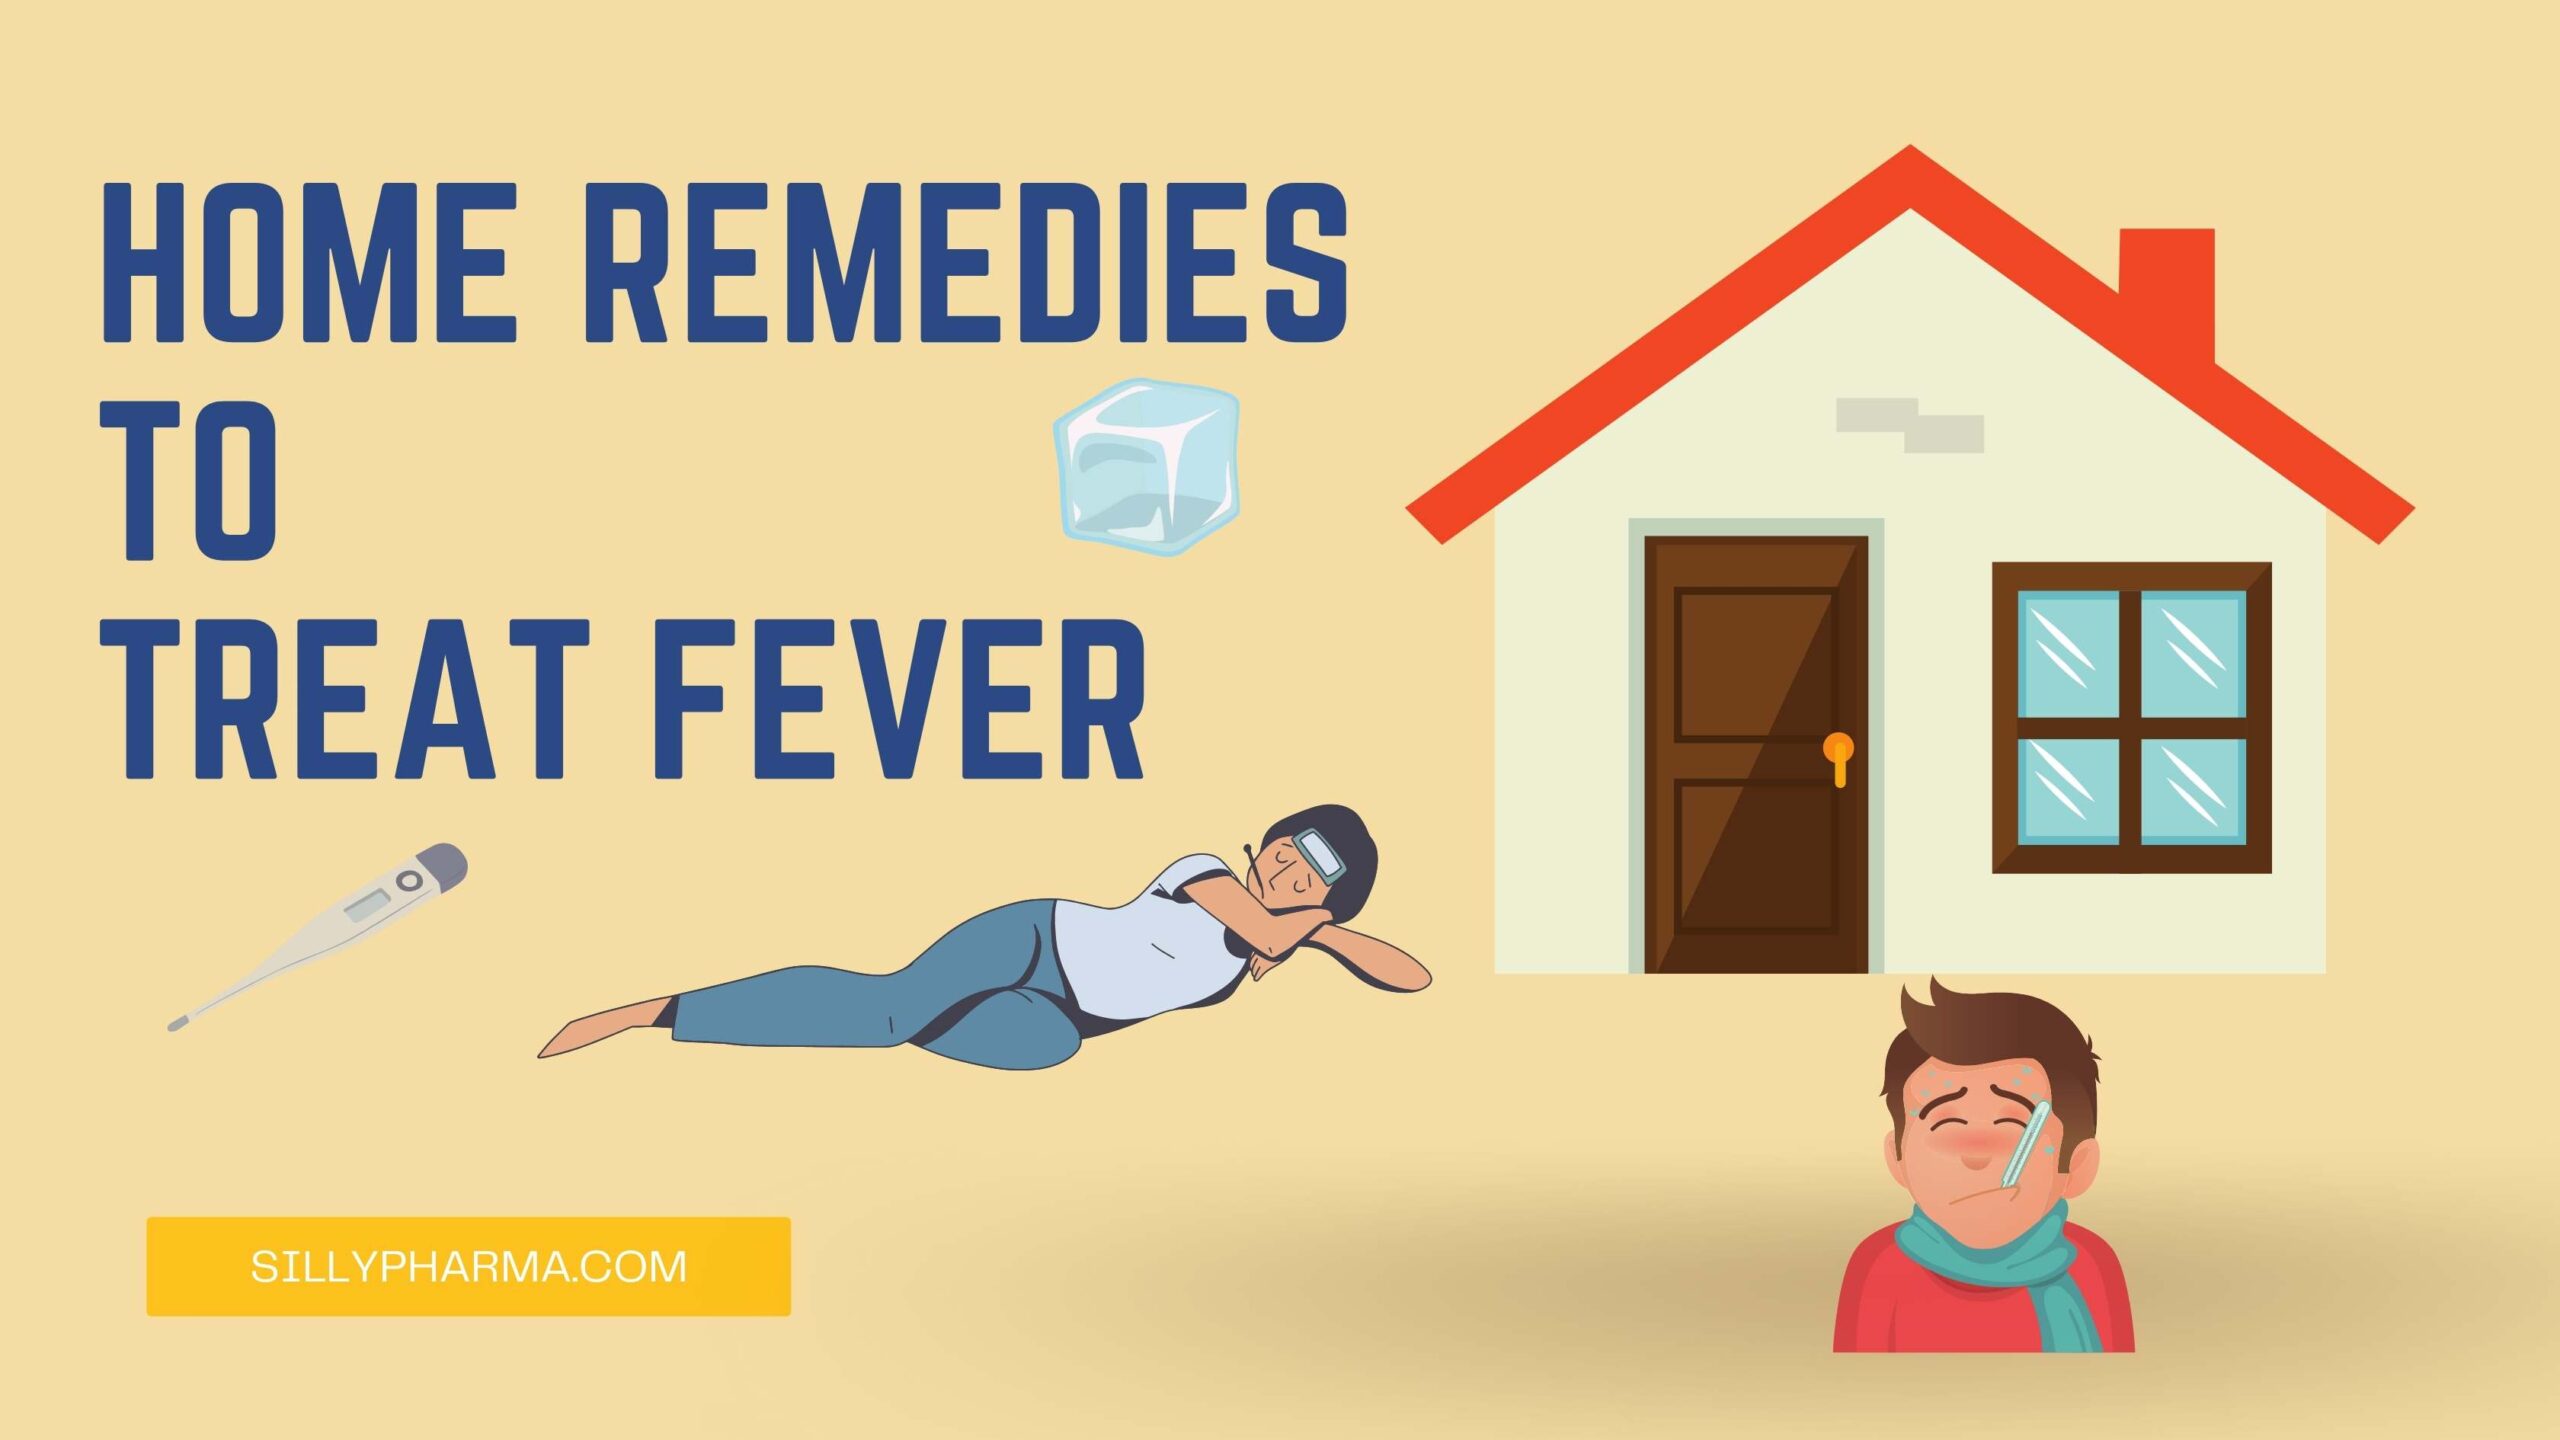 A Simple Guide To Treating Fever Naturally At Home.